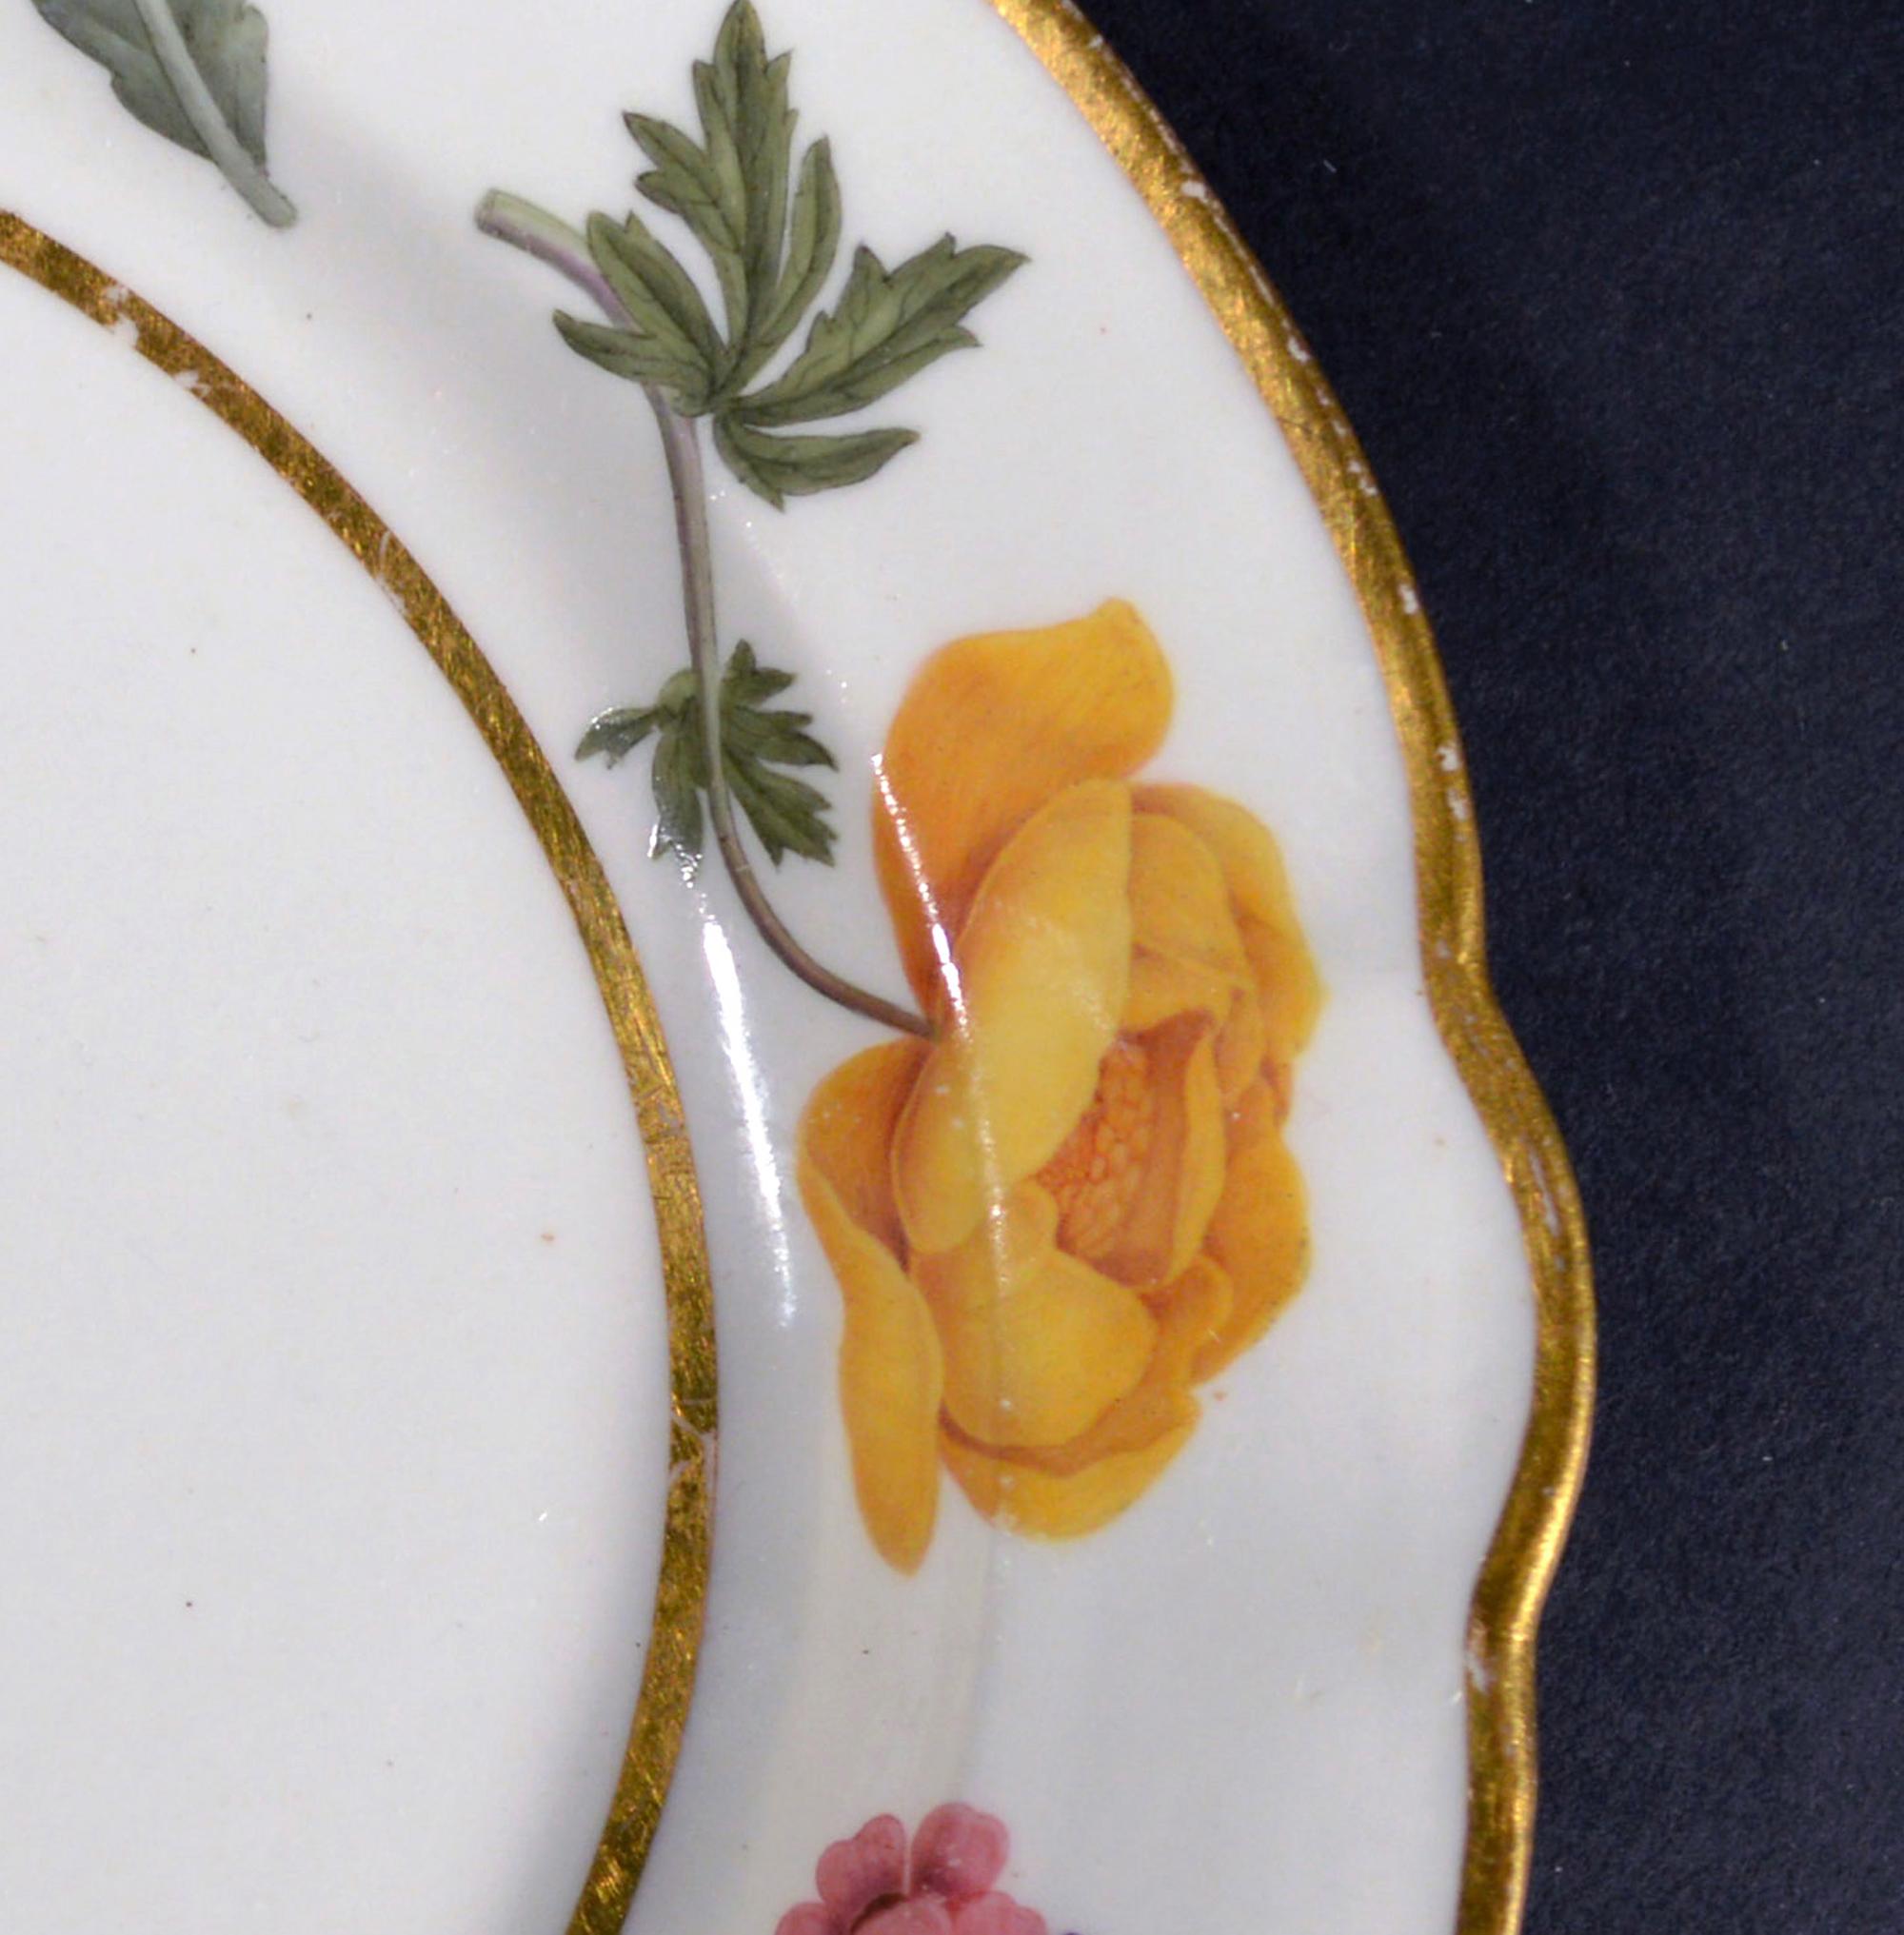 Flight & Barr Worcester Botanical Porcelain plate,
circa 1792-1800

The Flight & Barr porcelain dessert plate has a simple purple flower to the center with a gilt line surround. The wide, shaped rim is finely painted with three different